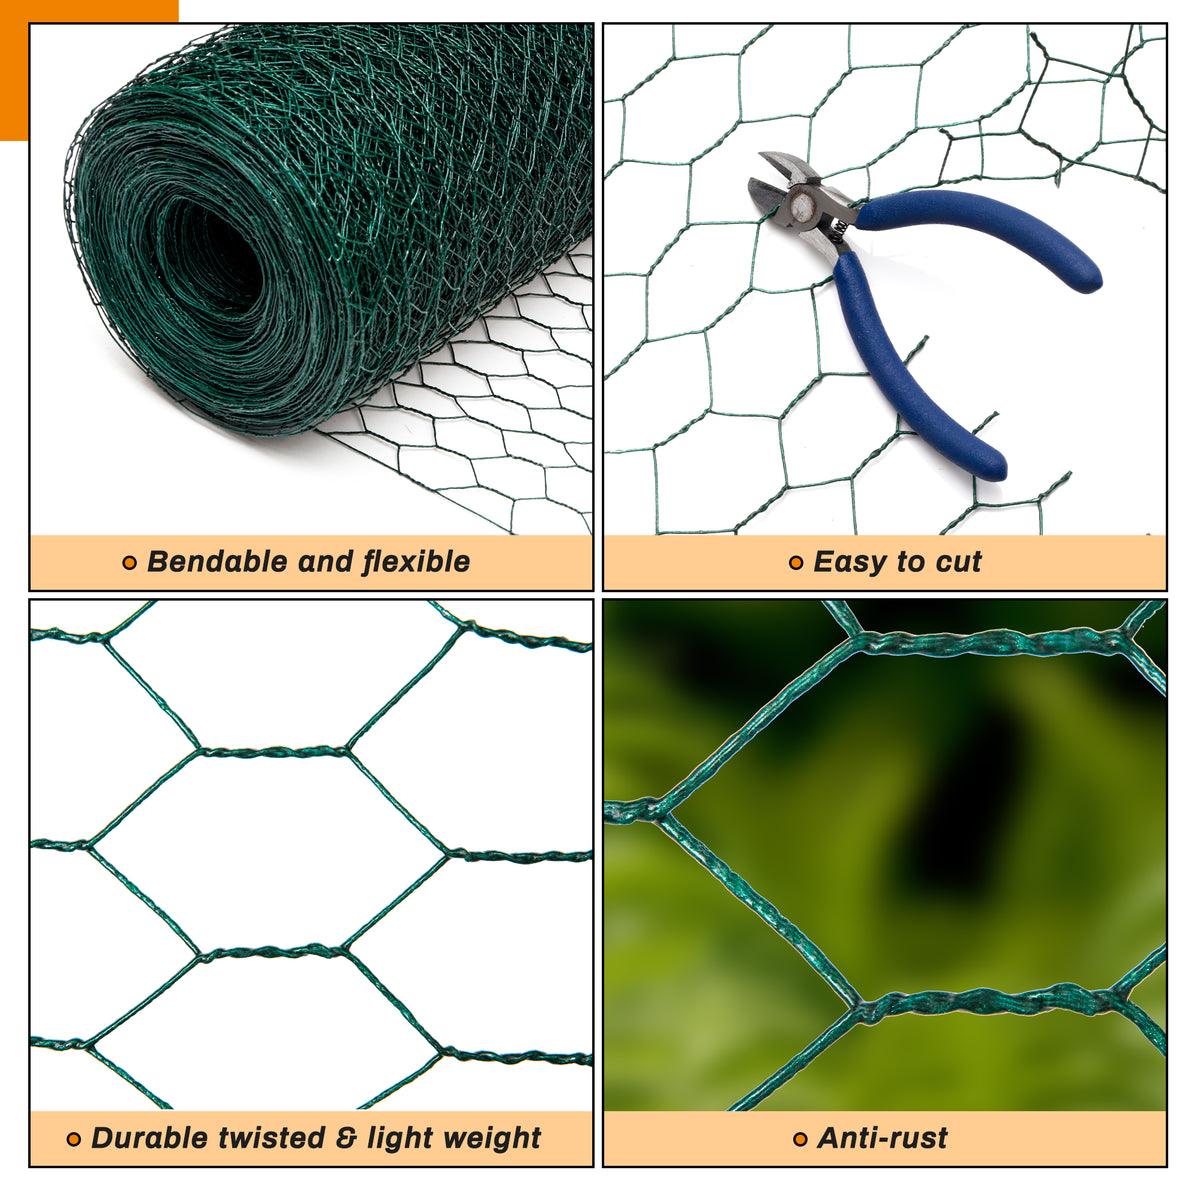 HITTITE Chicken Wire 48 inch(W) x 100 ft(L), Anti-Rust Hexagonal Galvanized Metal Green Garden Wire Netting for Floral Arrangements, PVC Coated Chicken Wire Coop for Crafts Plant Protector Pet Rabbits Fencing